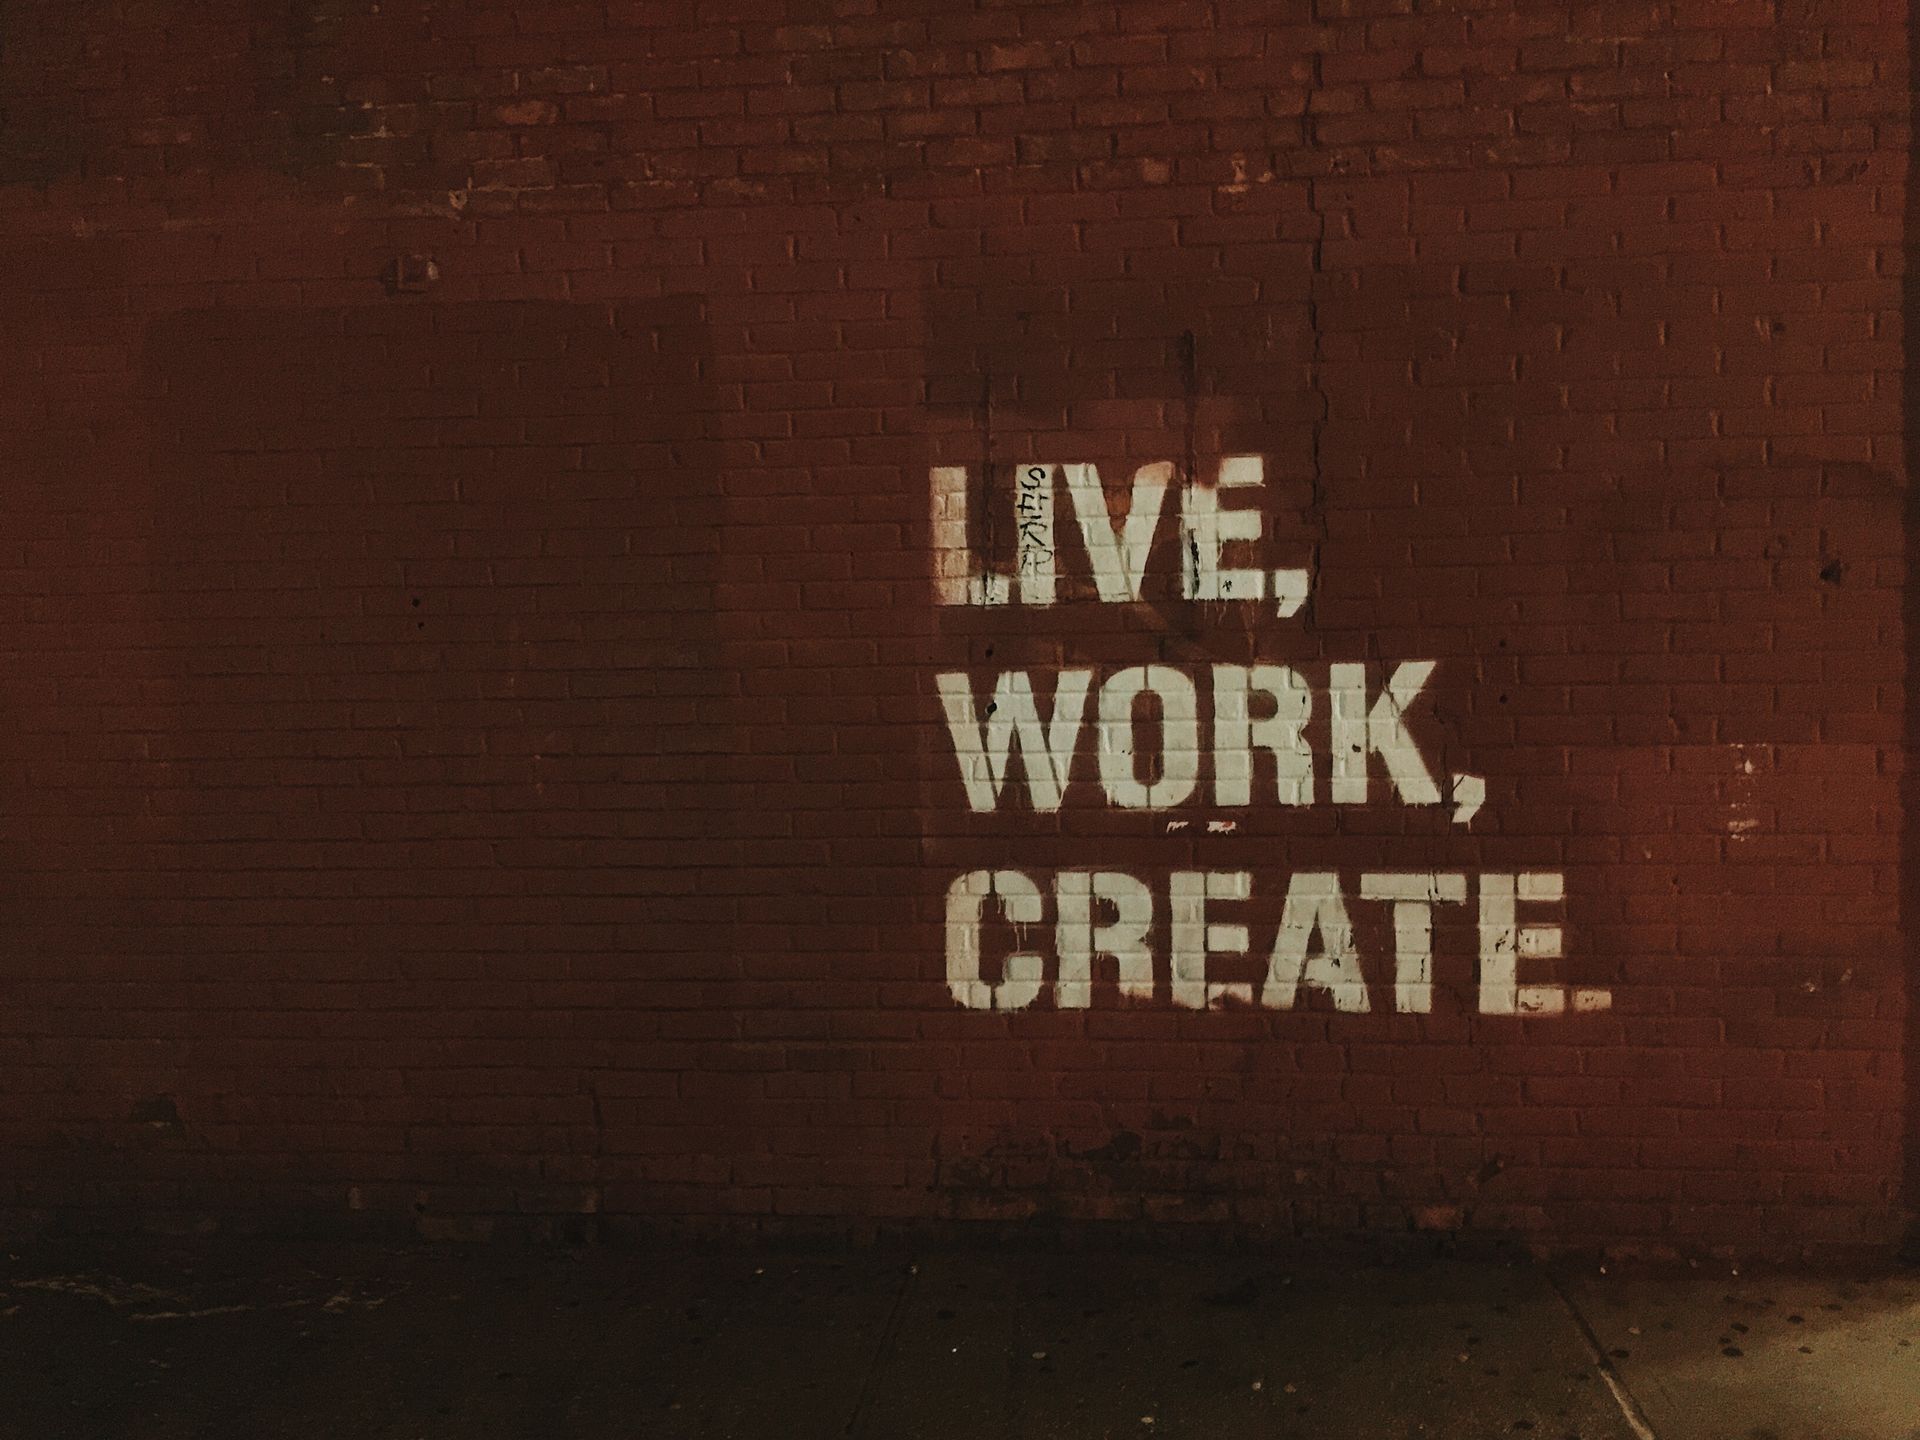 LIVE WORK CREATE painted on a red brick wall